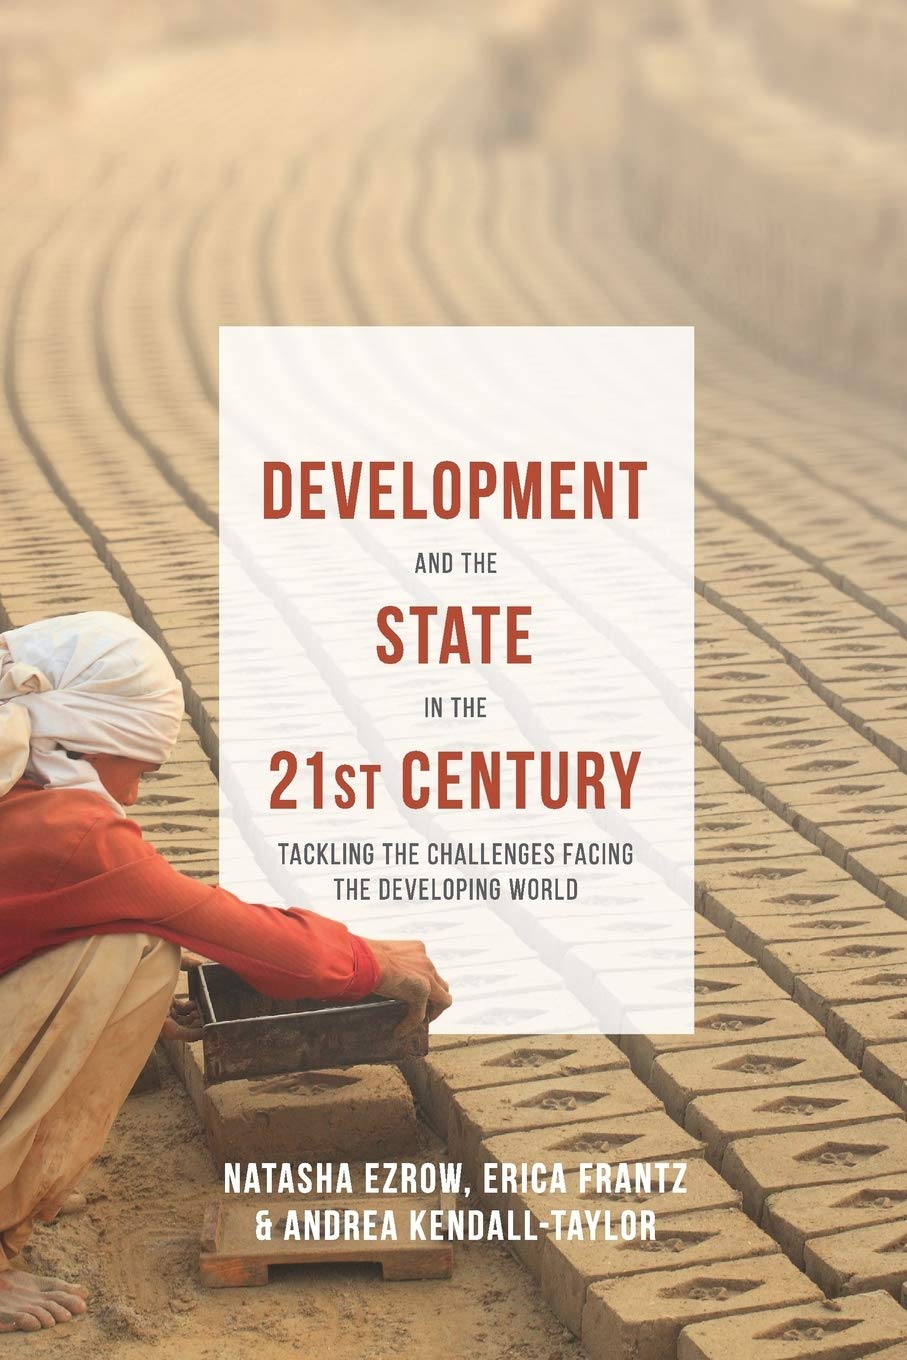 DEVELOPMENT AND THE STATE IN THE 21ST CENTURY - Virginia Book Company